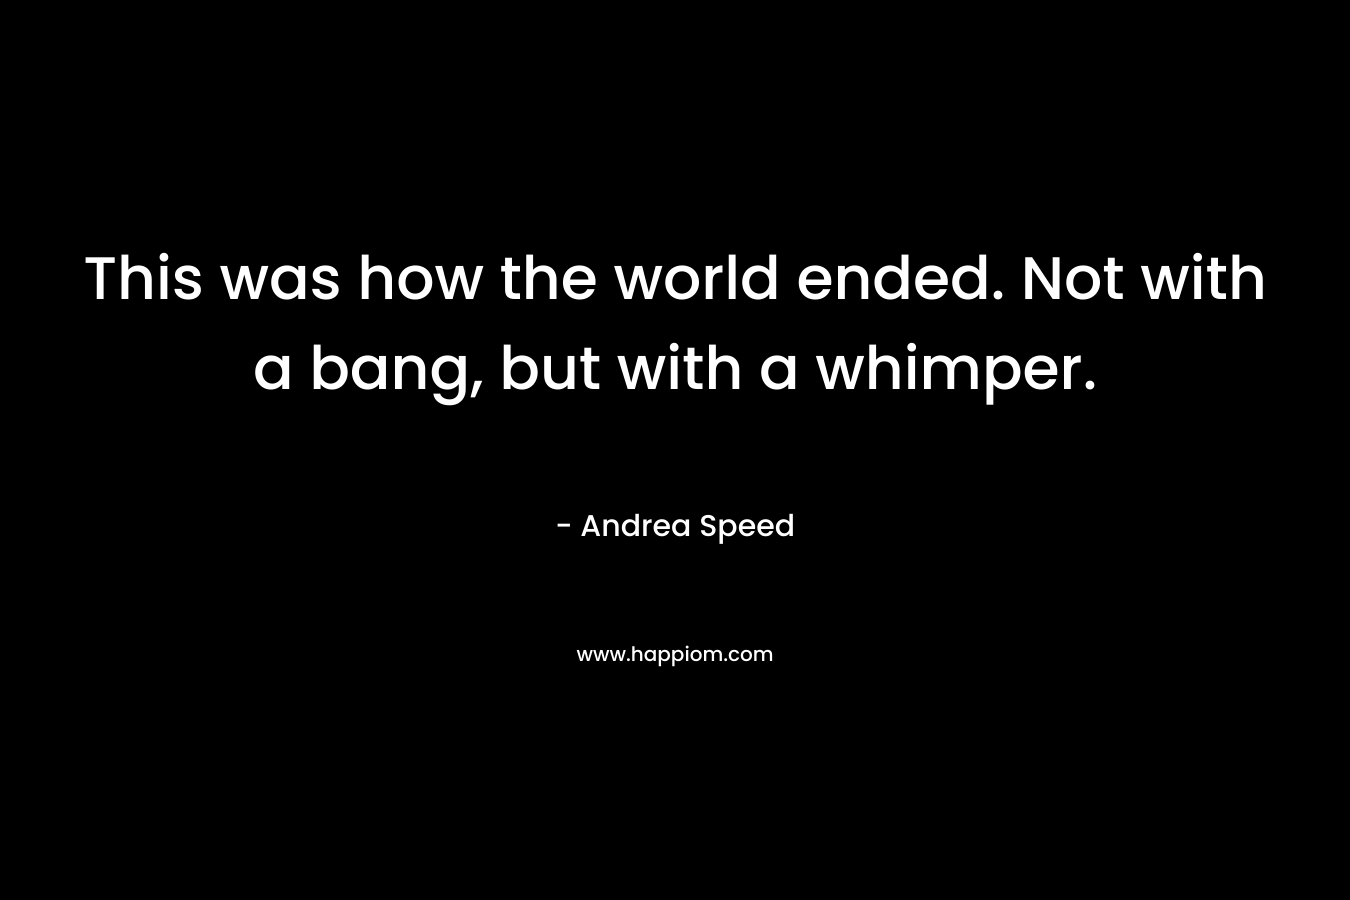 This was how the world ended. Not with a bang, but with a whimper. – Andrea Speed